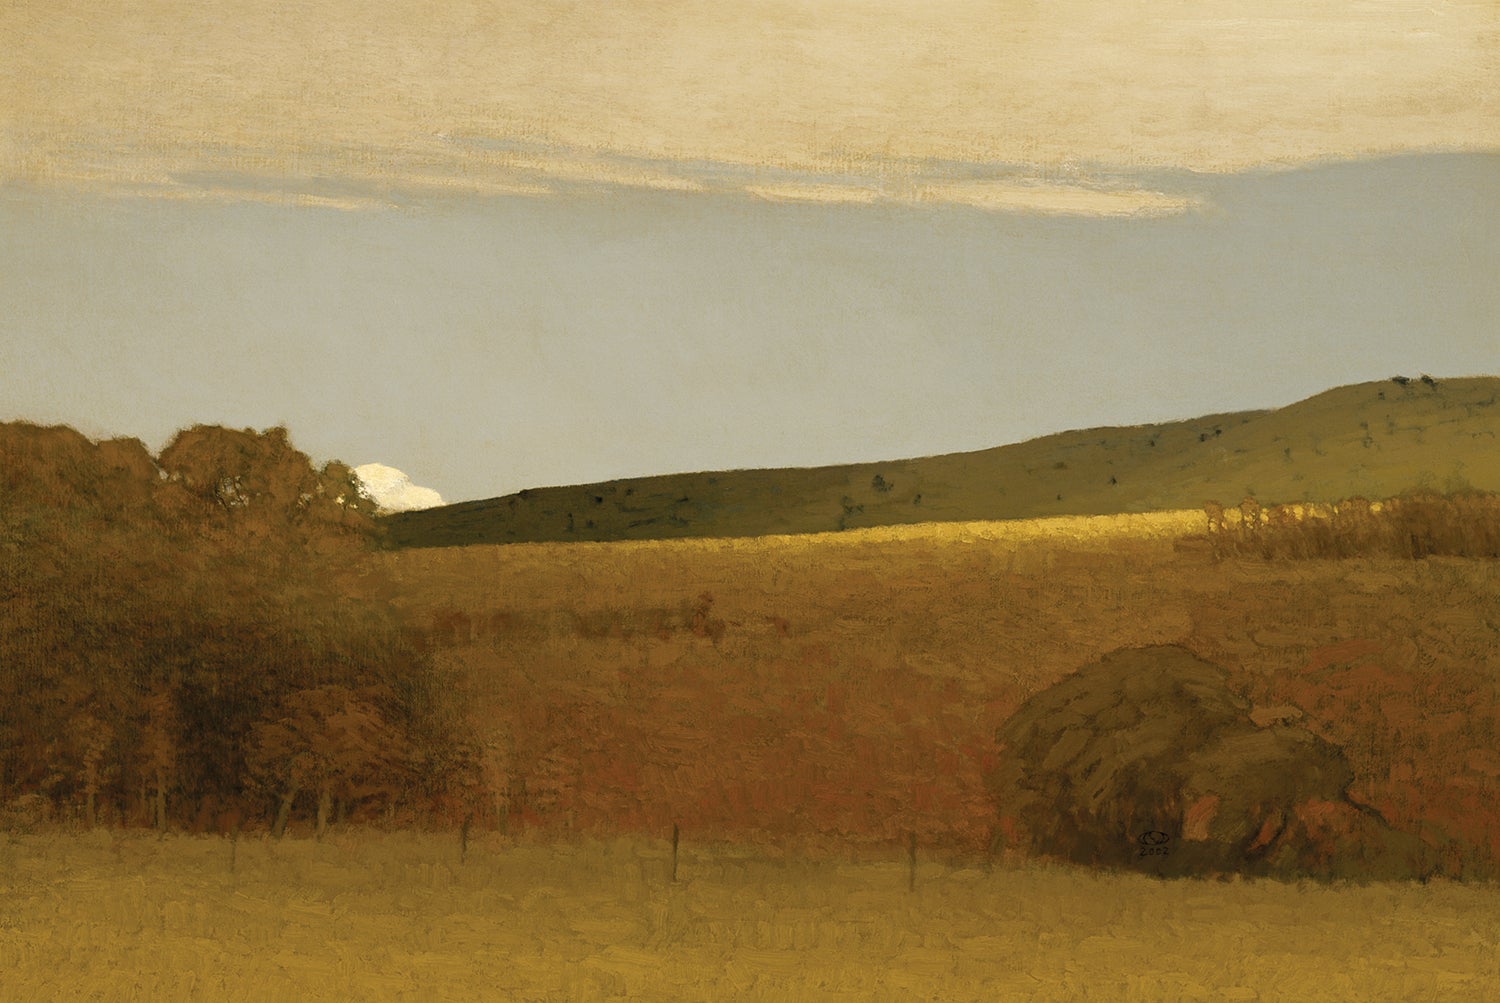 painting of a field with a fence and trees rises; behind that, two hills and a cloudy sky